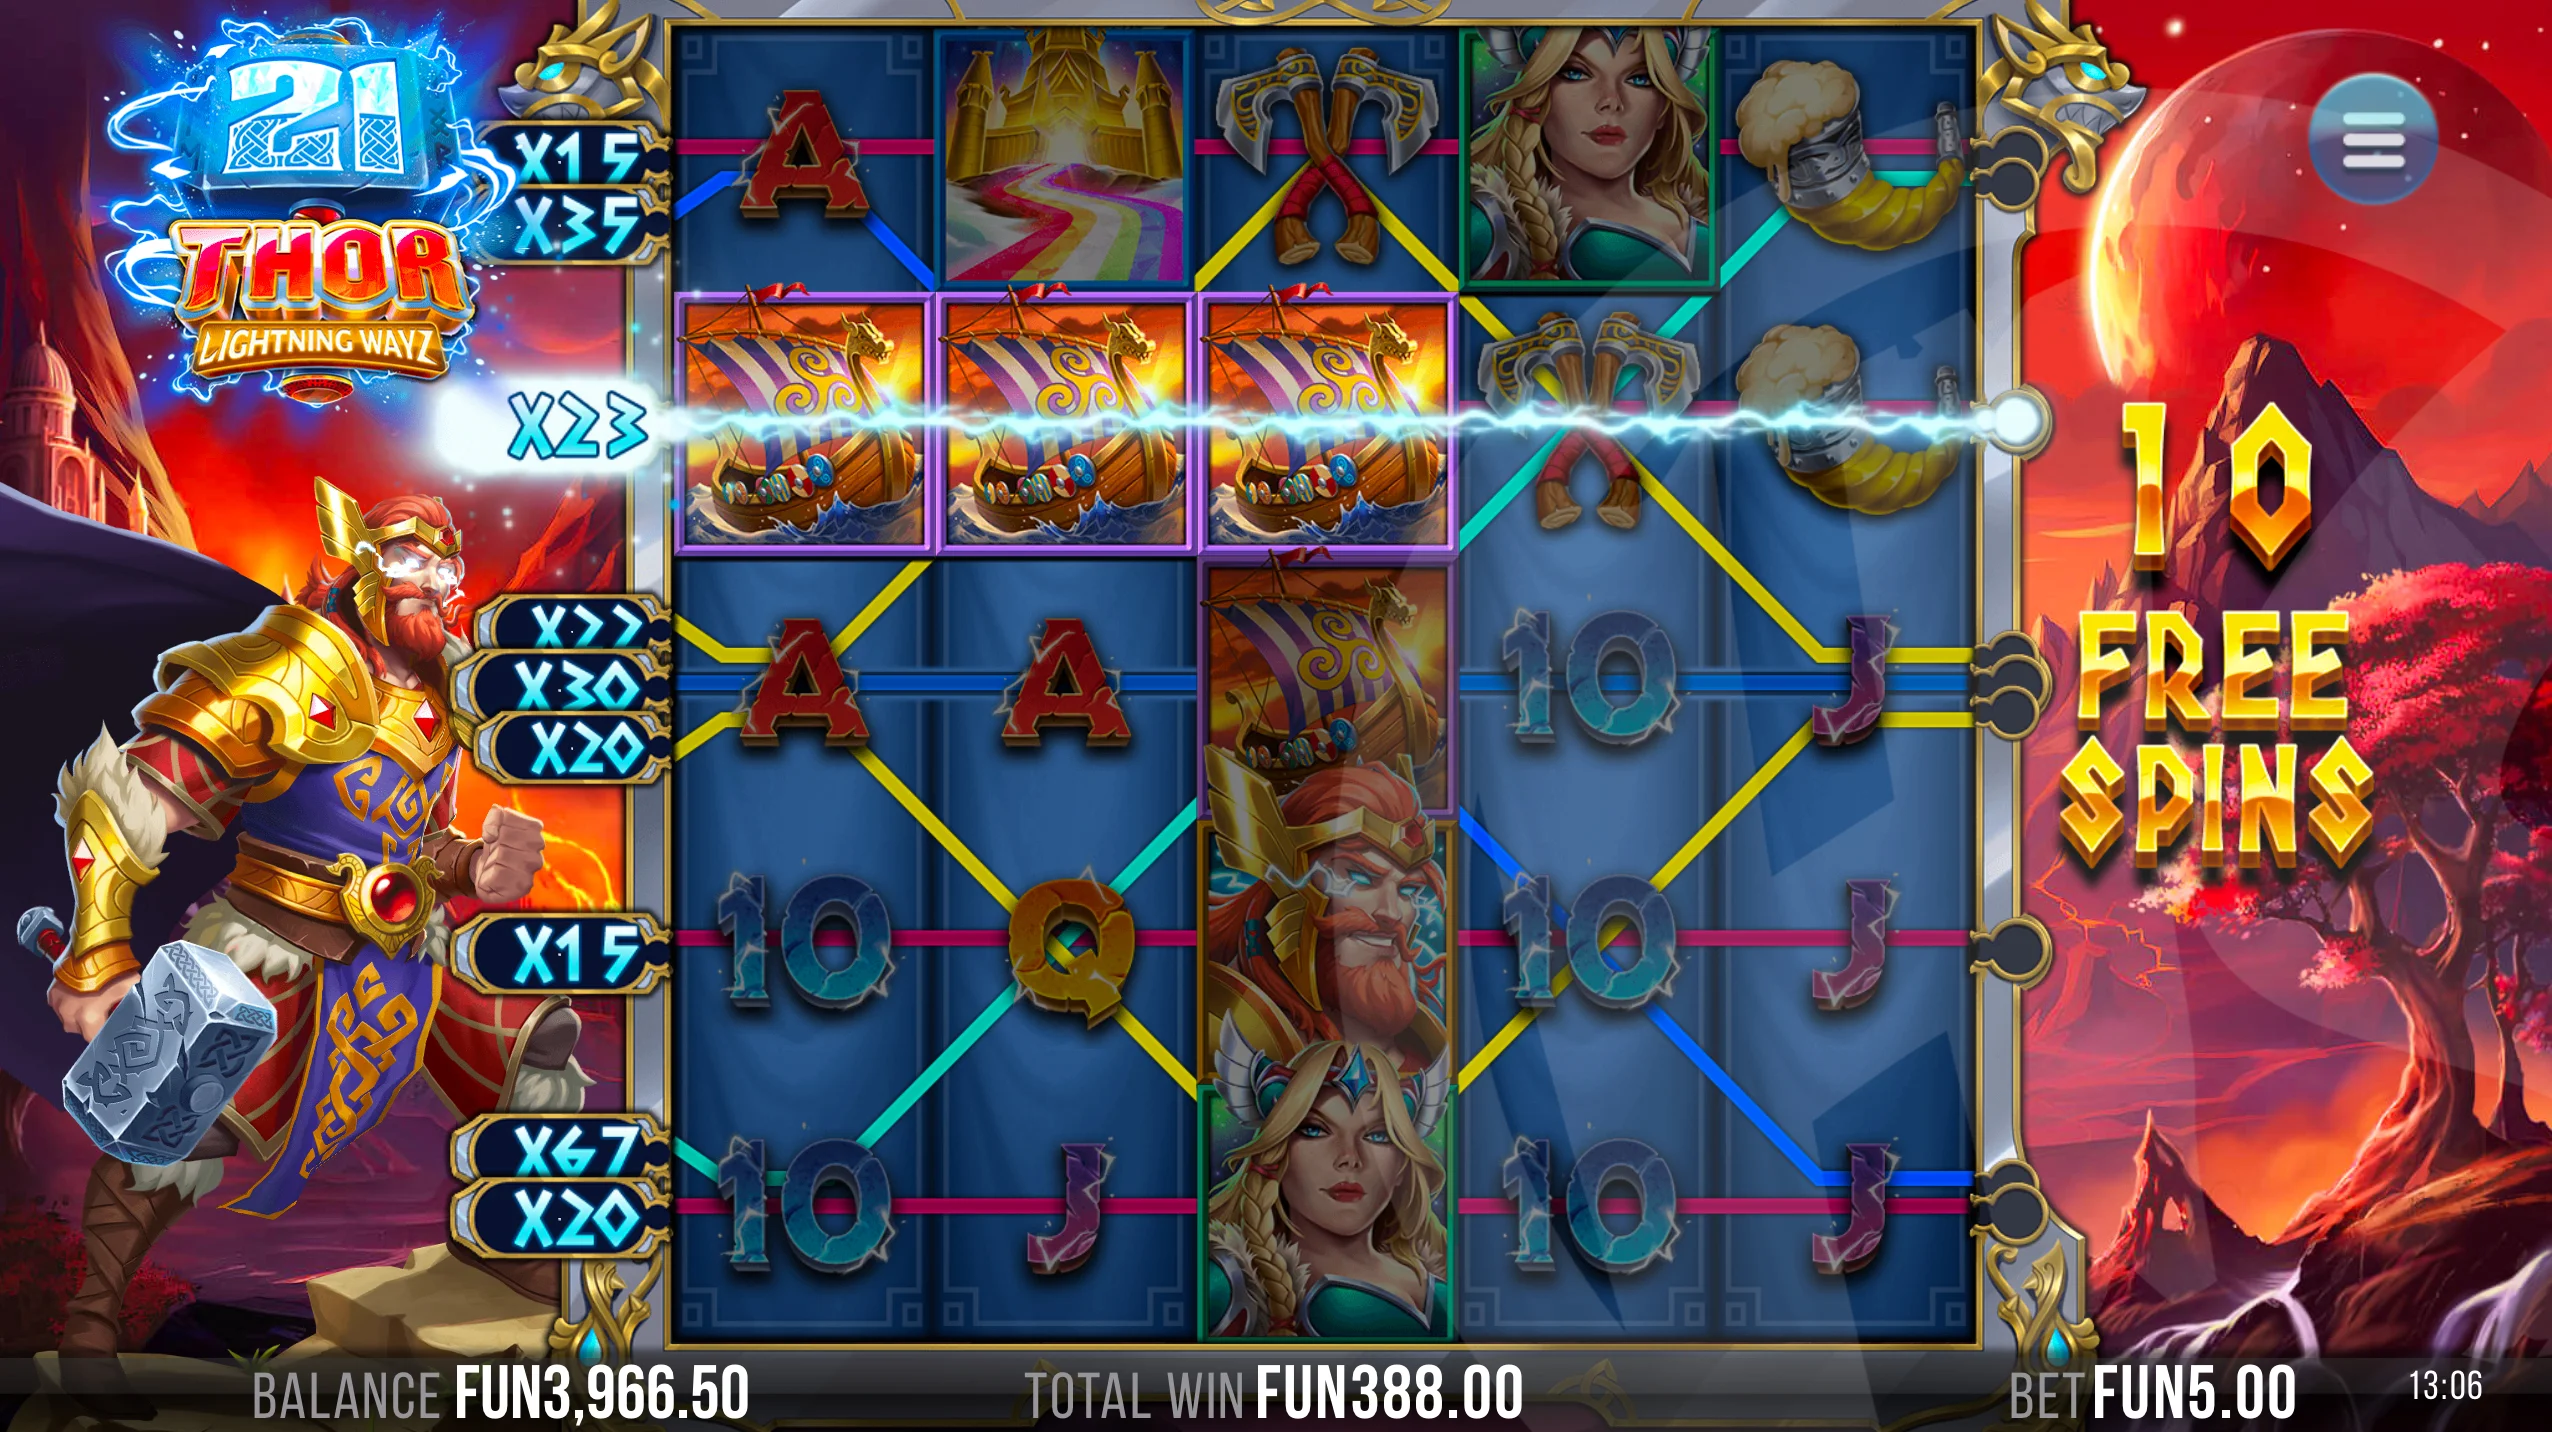 During Free Spins Every Win on a Lightning Way Increases Its Multiplier